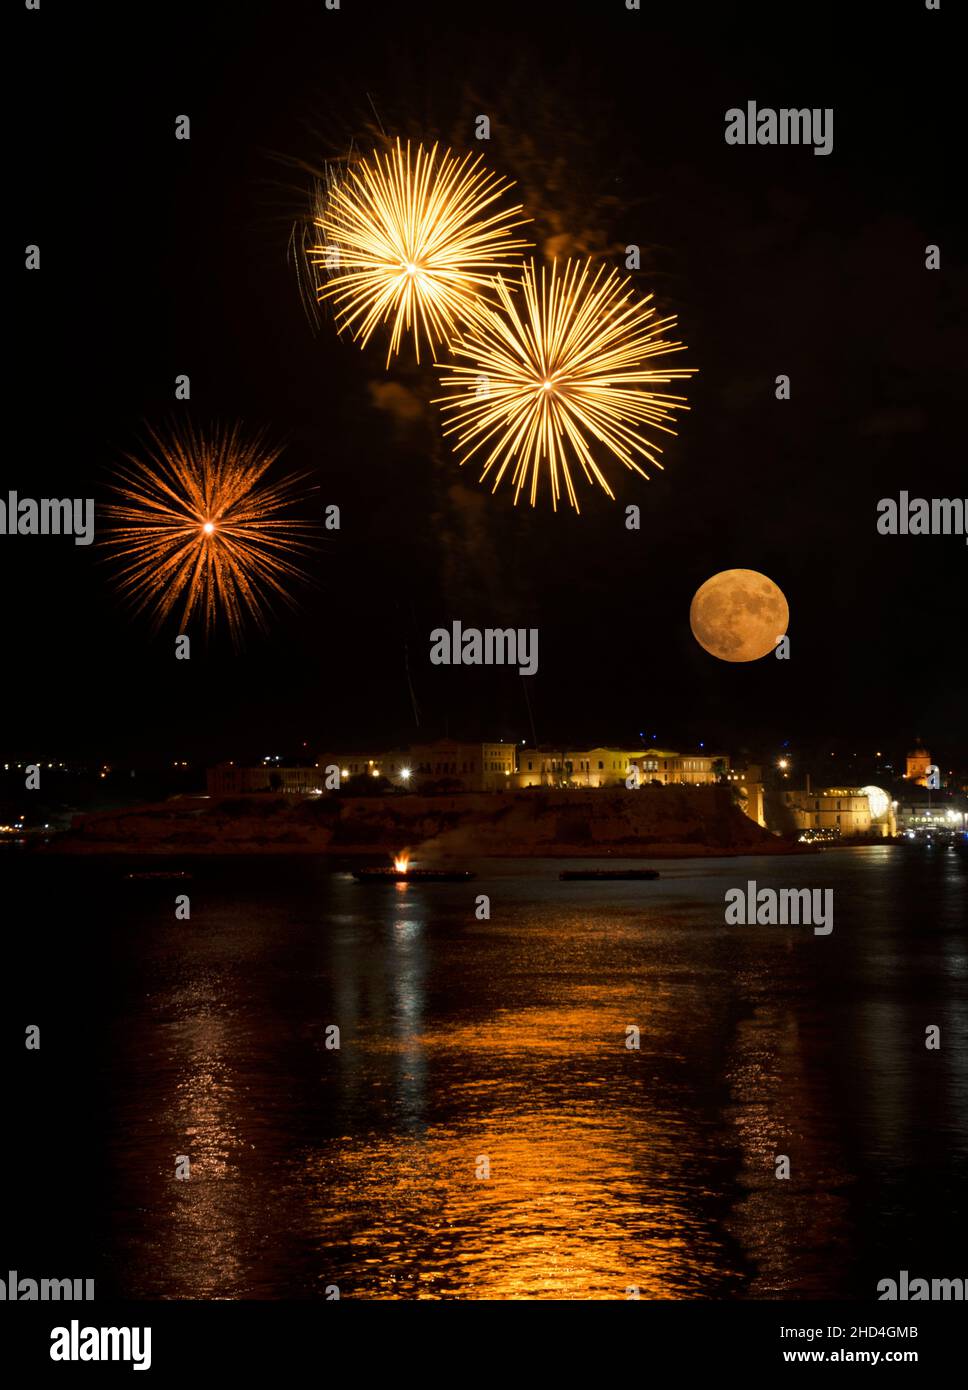 Full moon over Kalkara city in Malta with nice fireworks and its reflection in the sea during night. Night photography. Fireworks in Malta. Fireworks Stock Photo